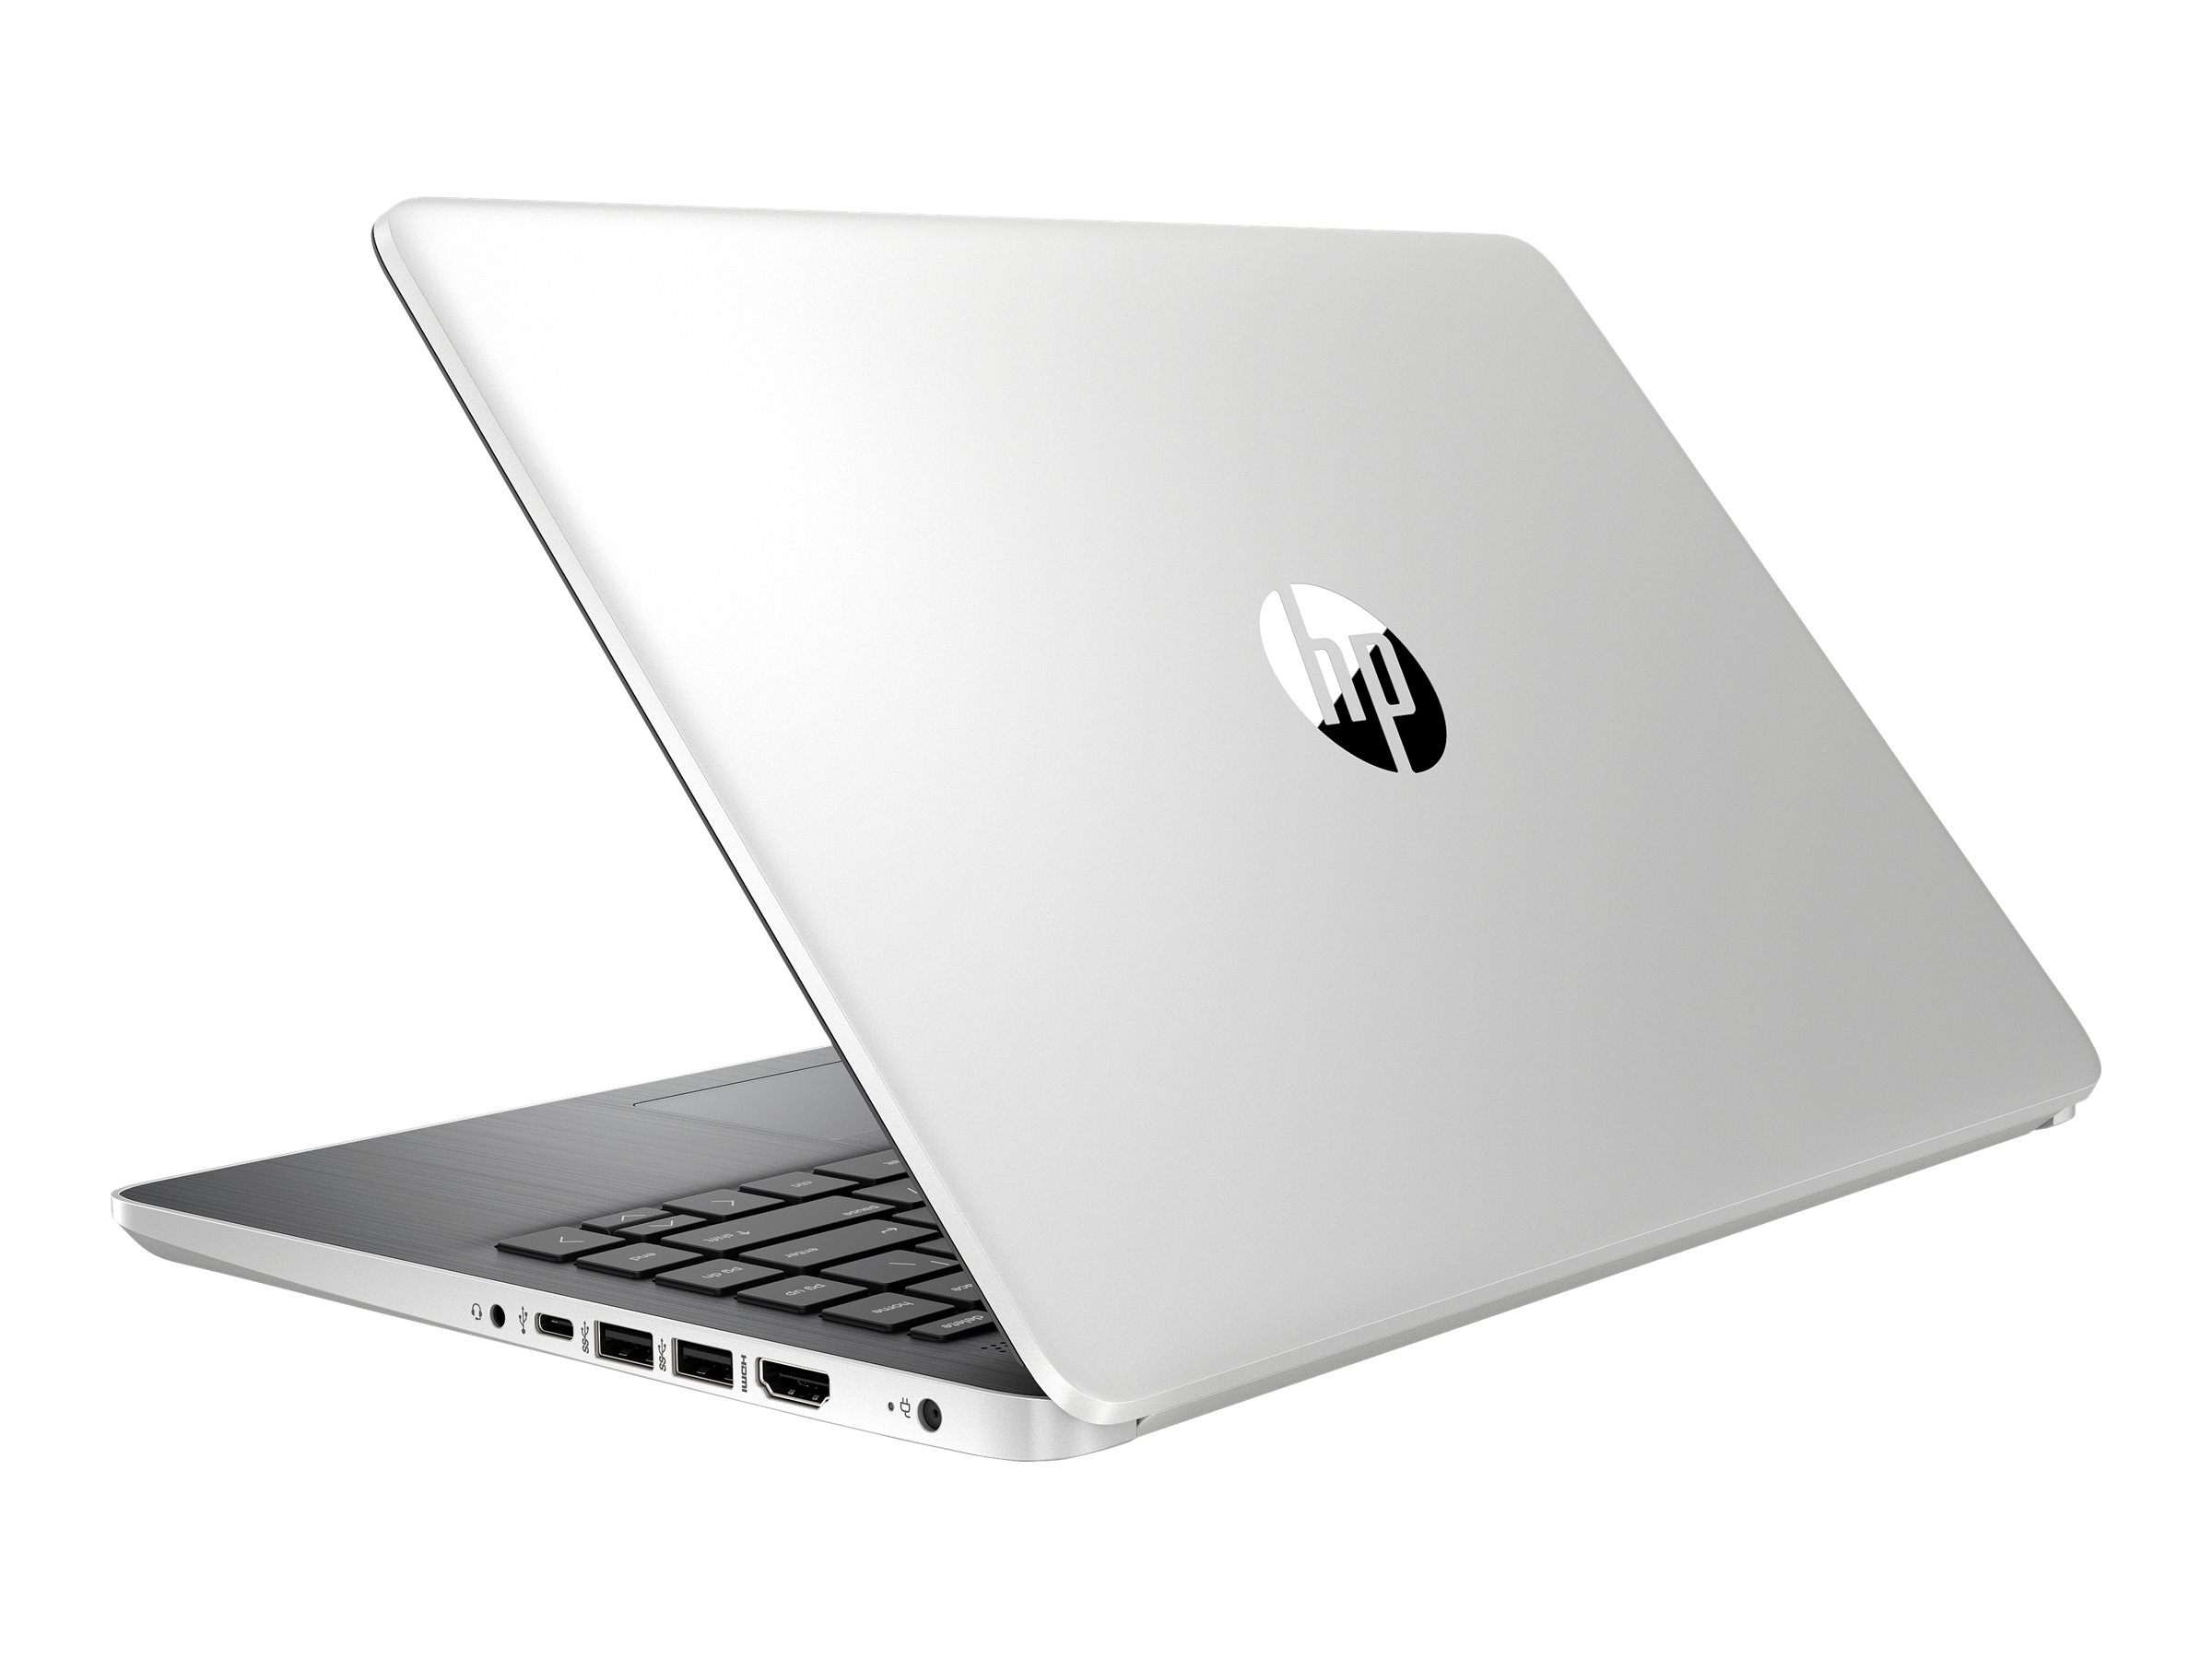 HP 14-dq1039wm 14" HD i5-1035G1 1.0GHz 8GB RAM 256GB SSD Win 10 Home Natural Silver - image 4 of 6